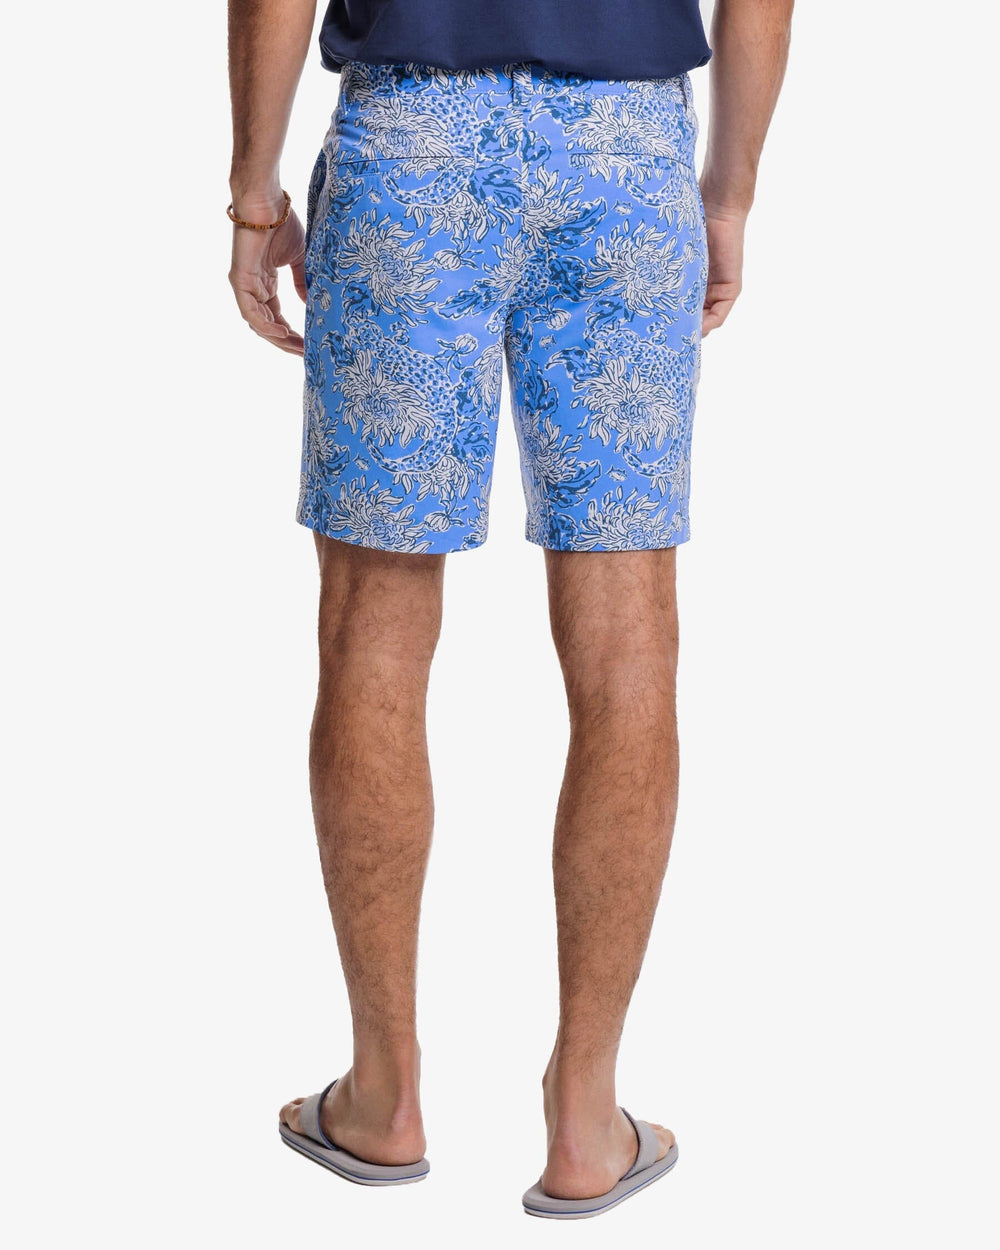 The back view of the Brrrdie Croc and Lock it Short by Southern Tide - Boca Blue